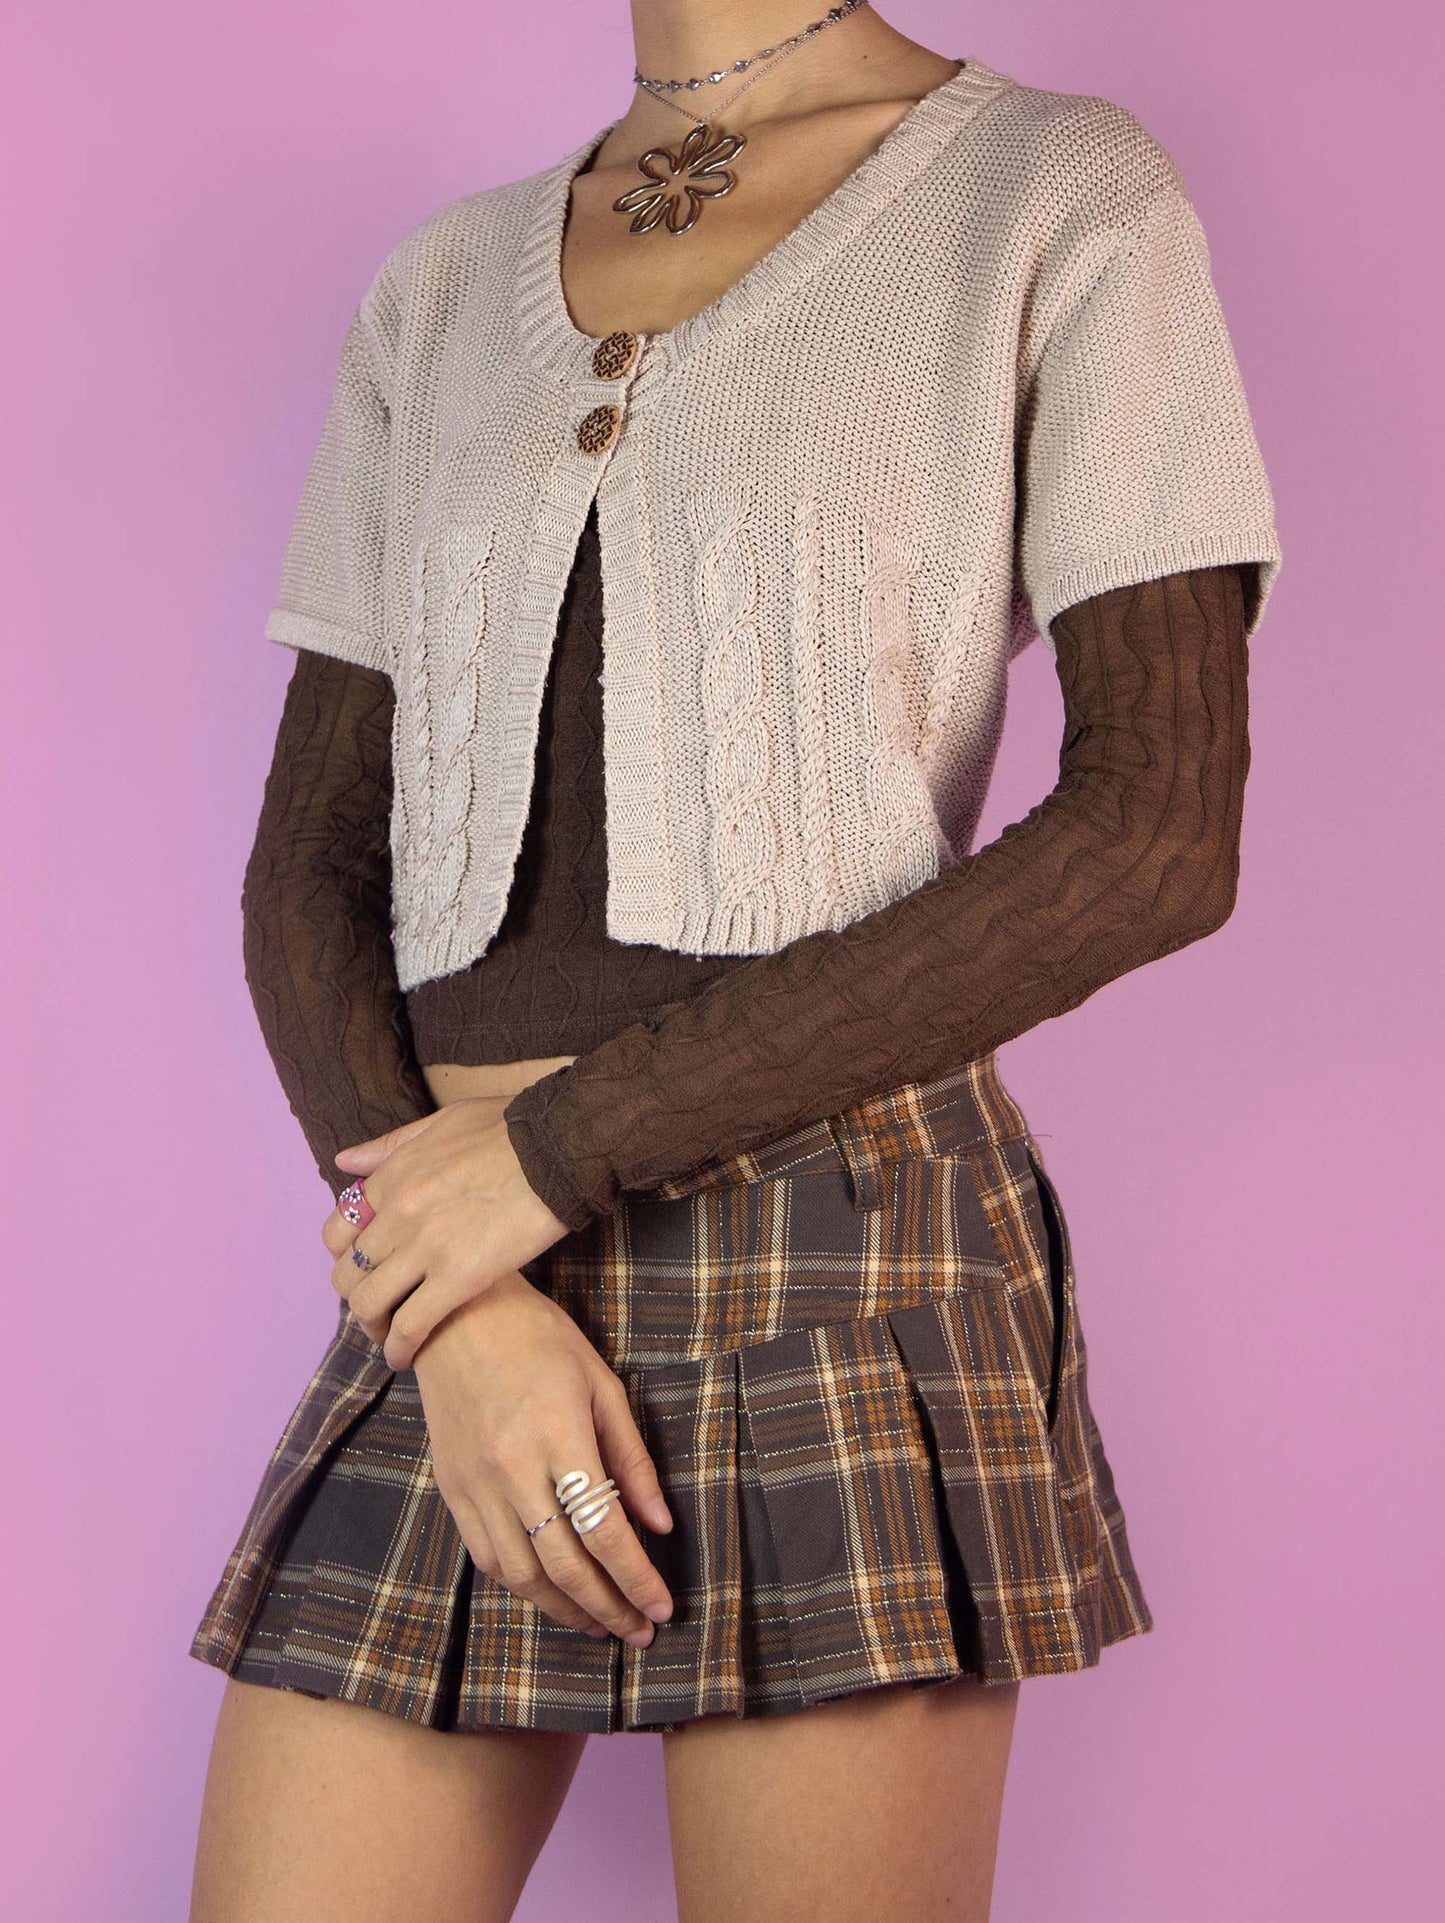 The Y2K Beige Knit Bolero Cardigan is a vintage light brown cropped bolero jacket with short sleeves and a two-button closure. Boho fairy grunge 2000s cable knit shrug.